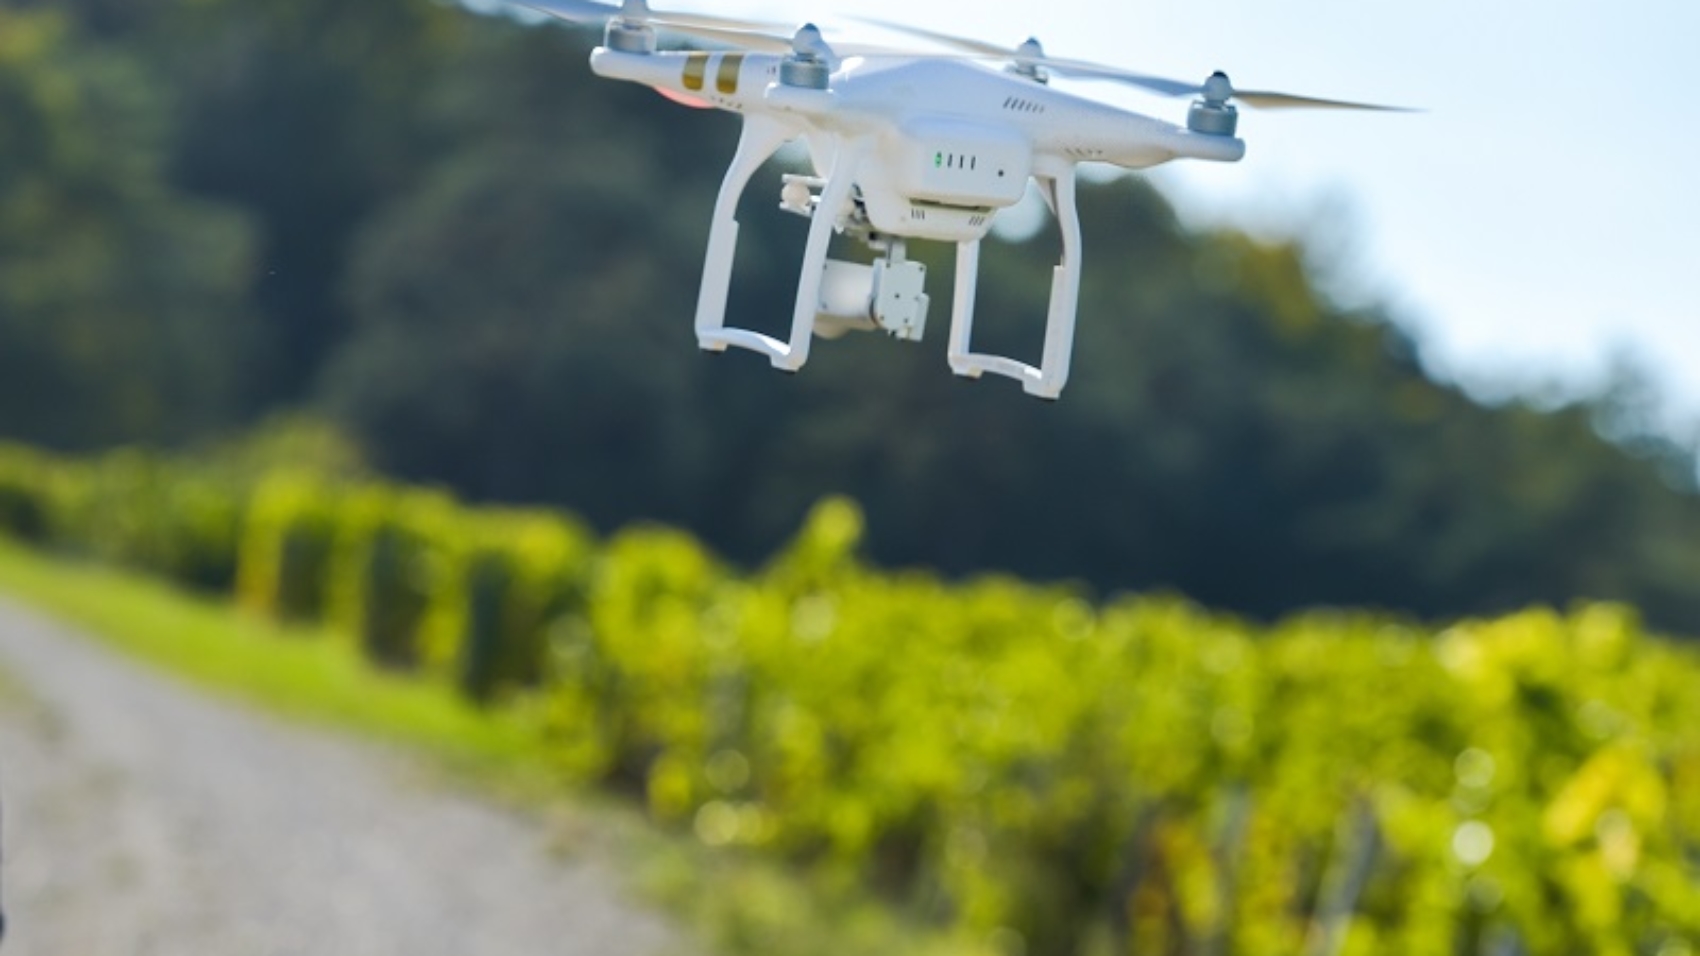 Man flying drone in wineyard, Champagne, France